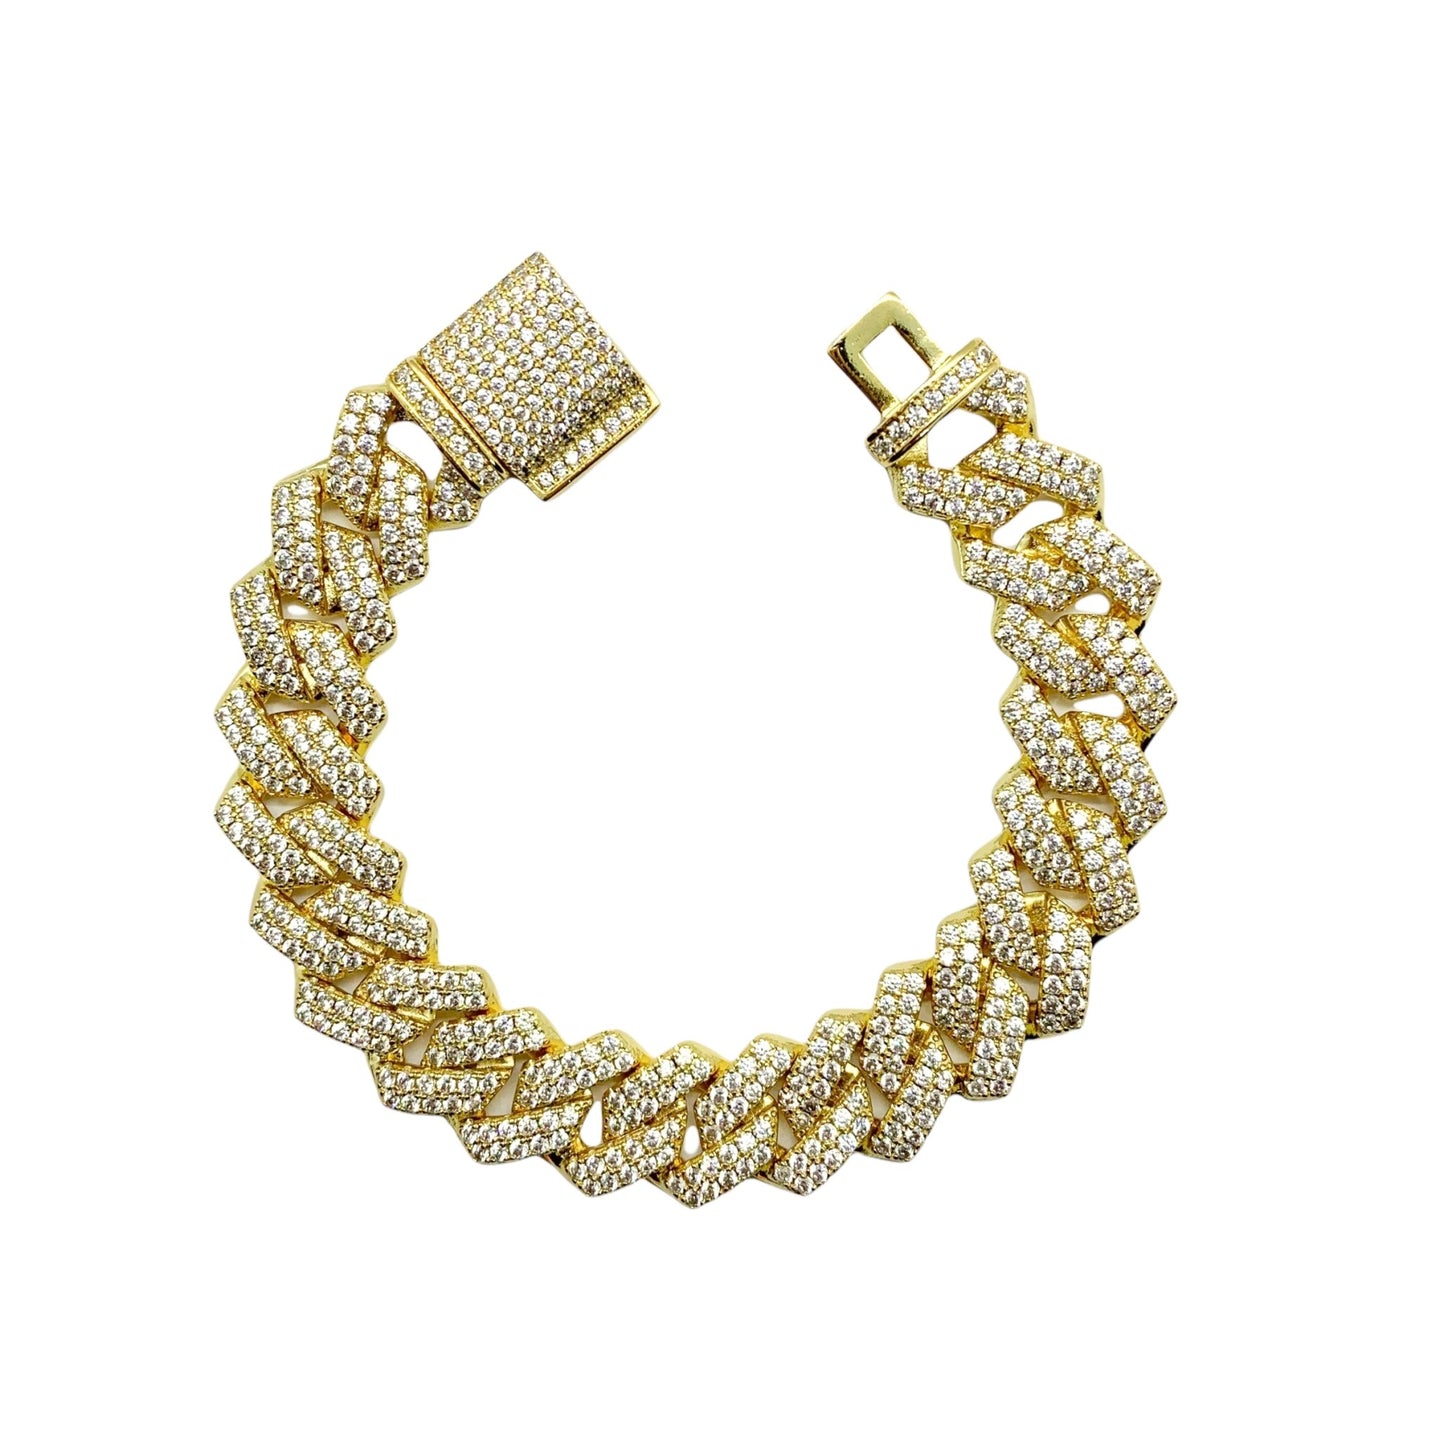 13mm Prong White Gold Plated Cuban Link Bracelet - Bedazzle Baddie